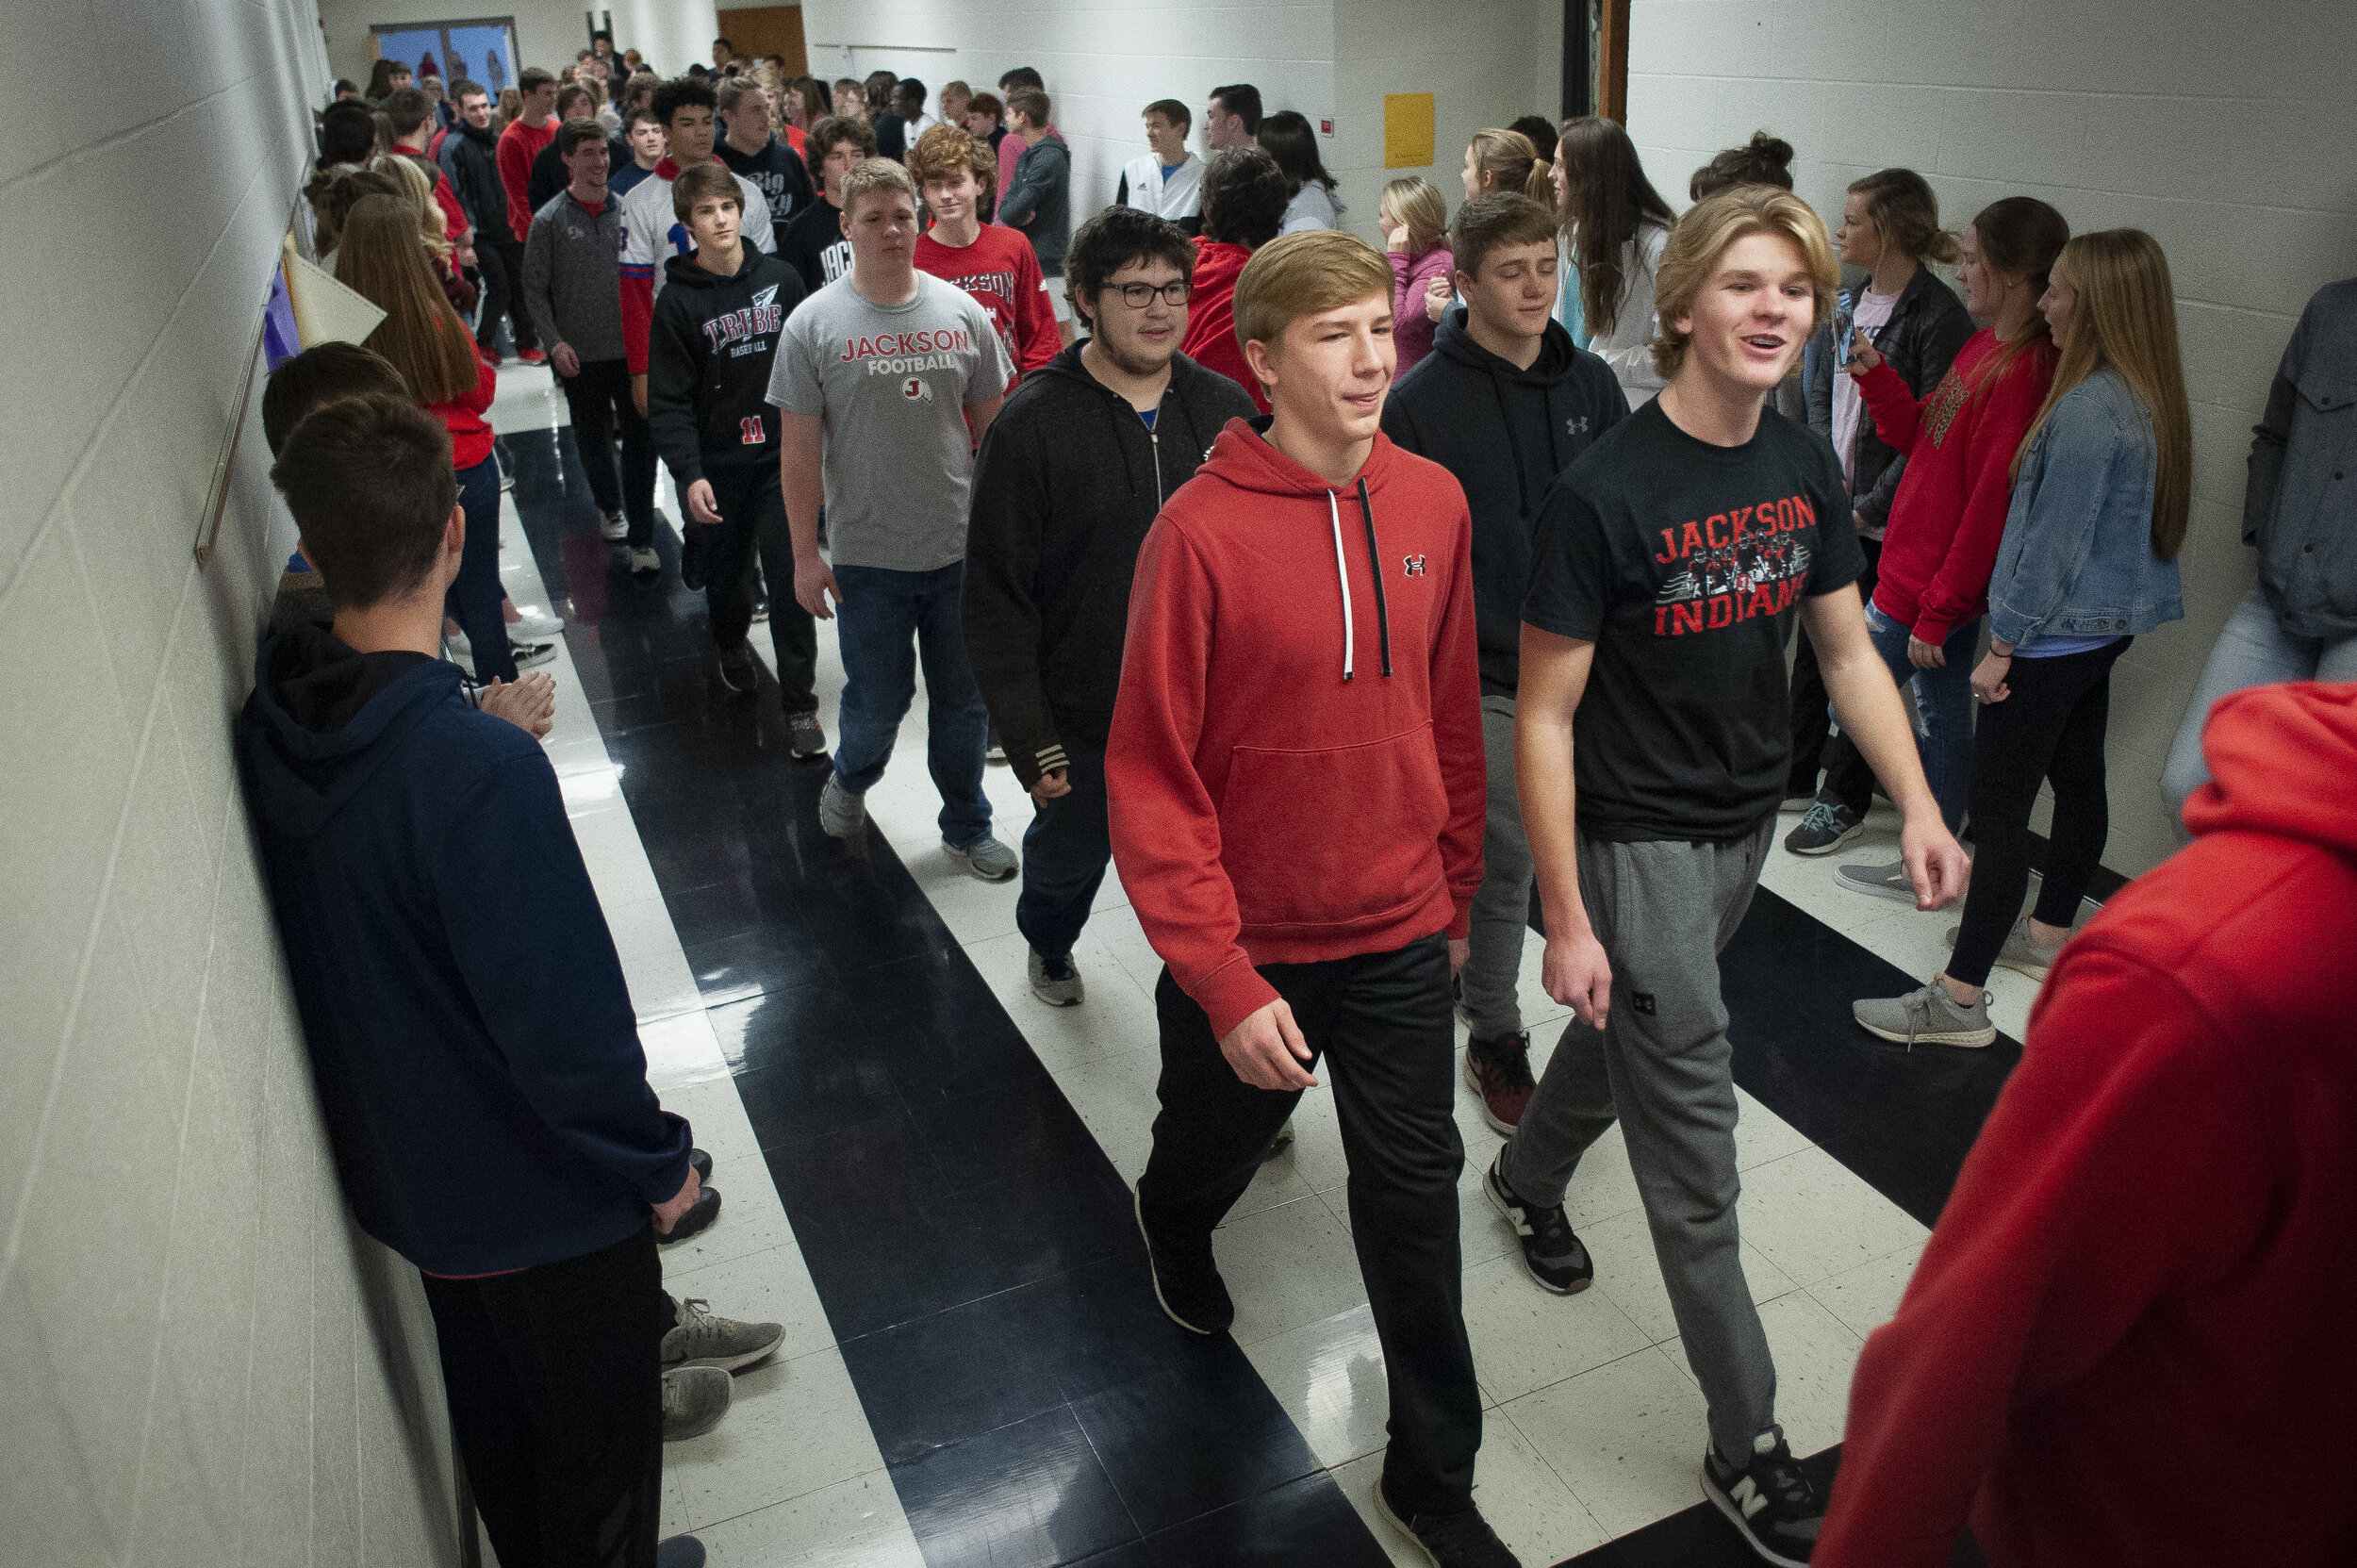  Jackson football players take part in a procession through Jackson High School shortly before departing for the Class 5 state championship Friday, Dec. 6, 2019, in Jackson.  